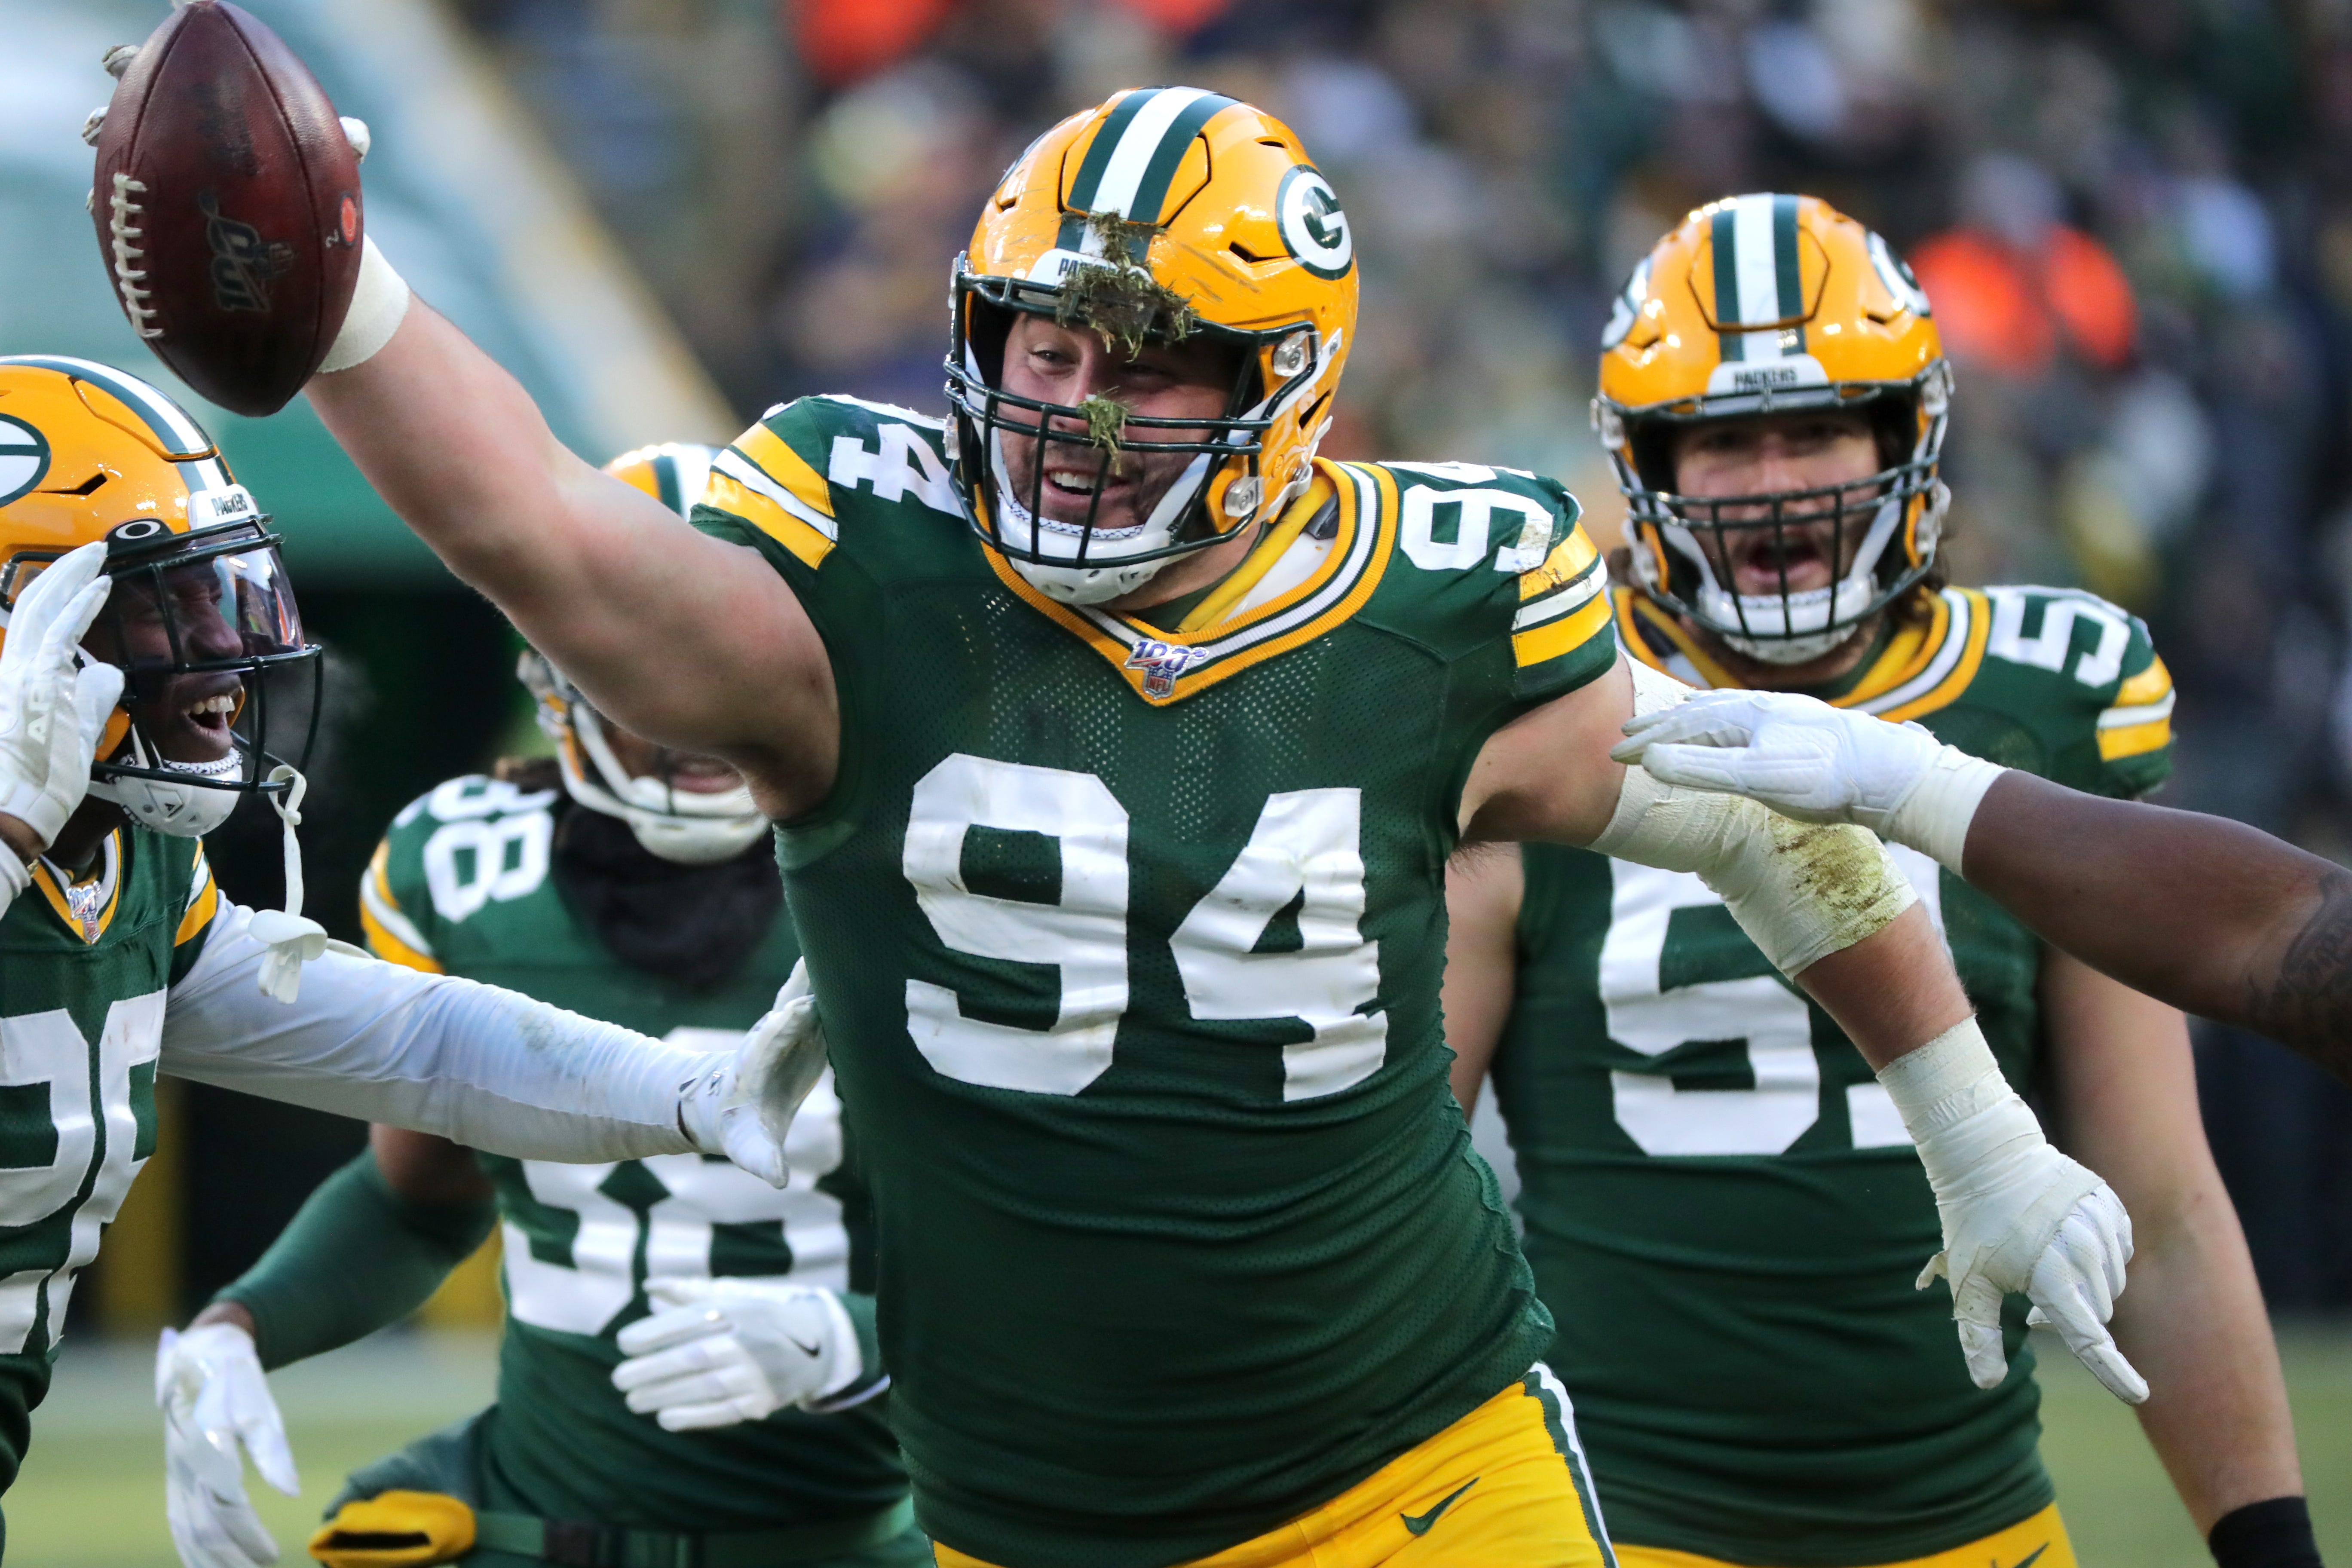 Green Bay Packers defensive end Dean Lowry (94) celebrates his interception during the fourth quarter of their game Sunday, December 15, 2019 at Lambeau Field in Green Bay, Wis. The Green Bay Packers beat the Chicago Bears 21-13.